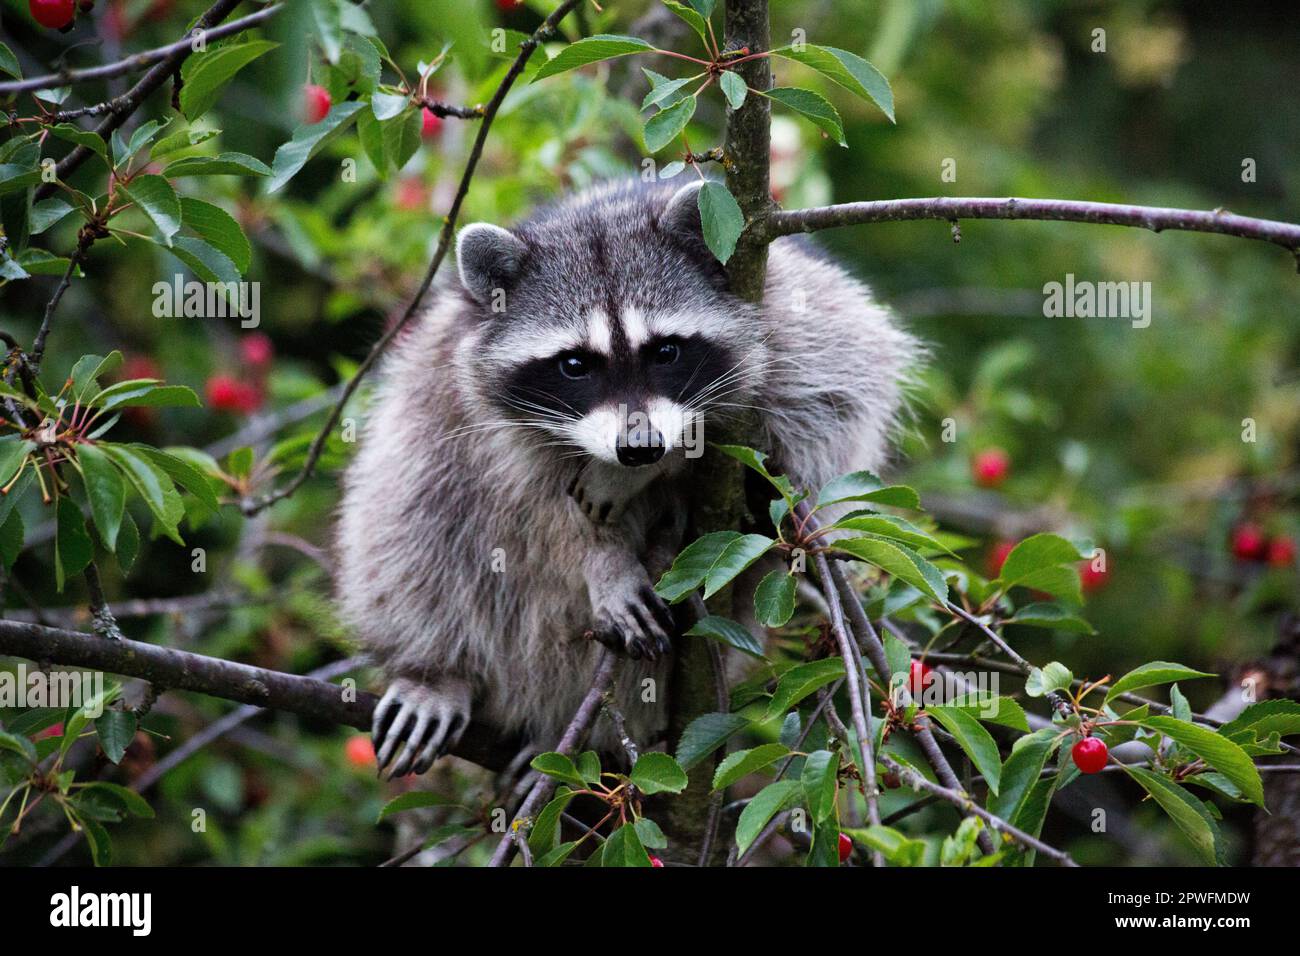 A raccoon / racoon sitting in a berry tree Stock Photo